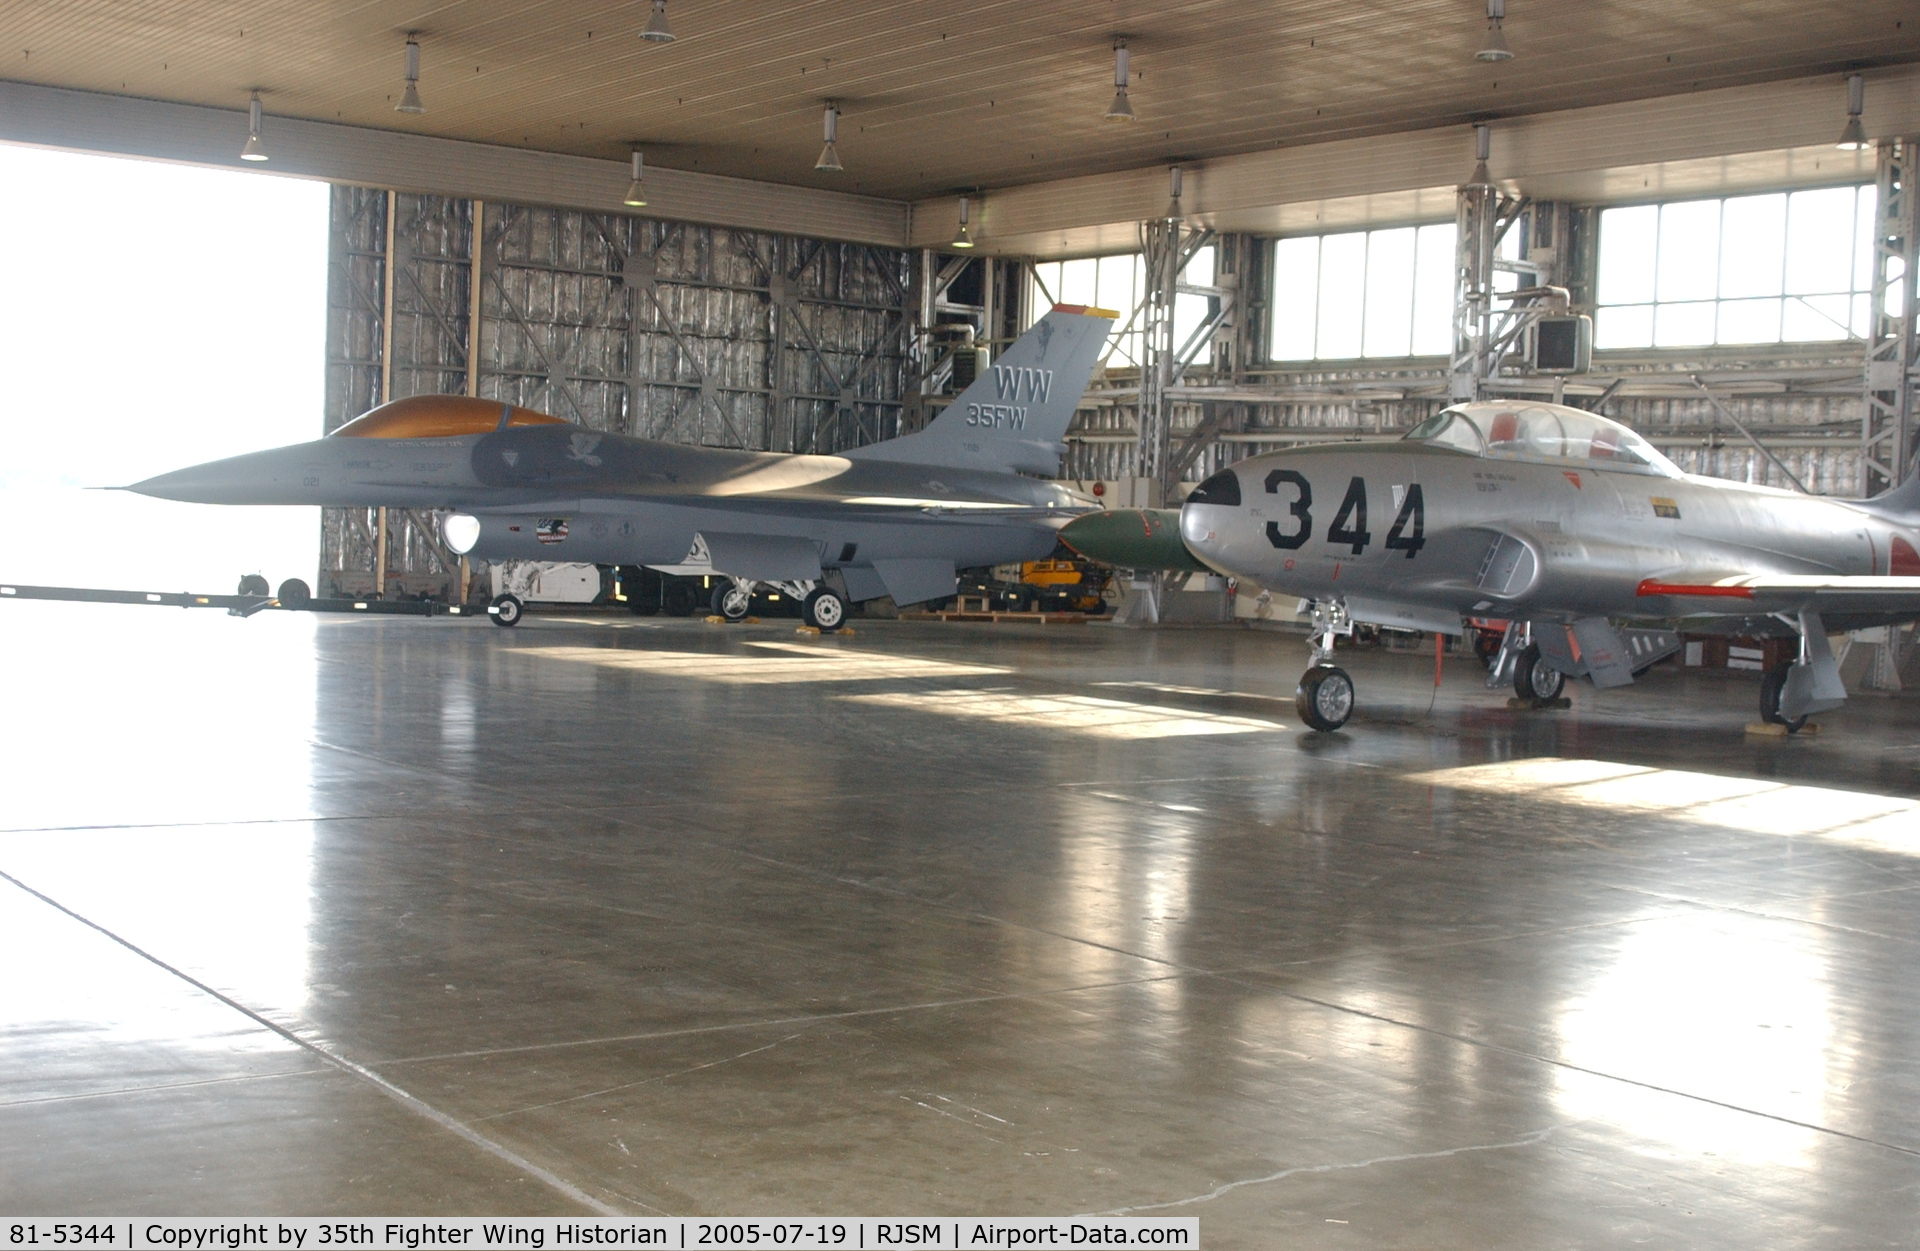 81-5344, 1956 Lockheed T-33A Shooting Star C/N KAC1144, 81-5344 in the hangar prior to its move to the Misawa Aviation & Science Museum after demilitarization and restoration along with F-16A 78-0021.